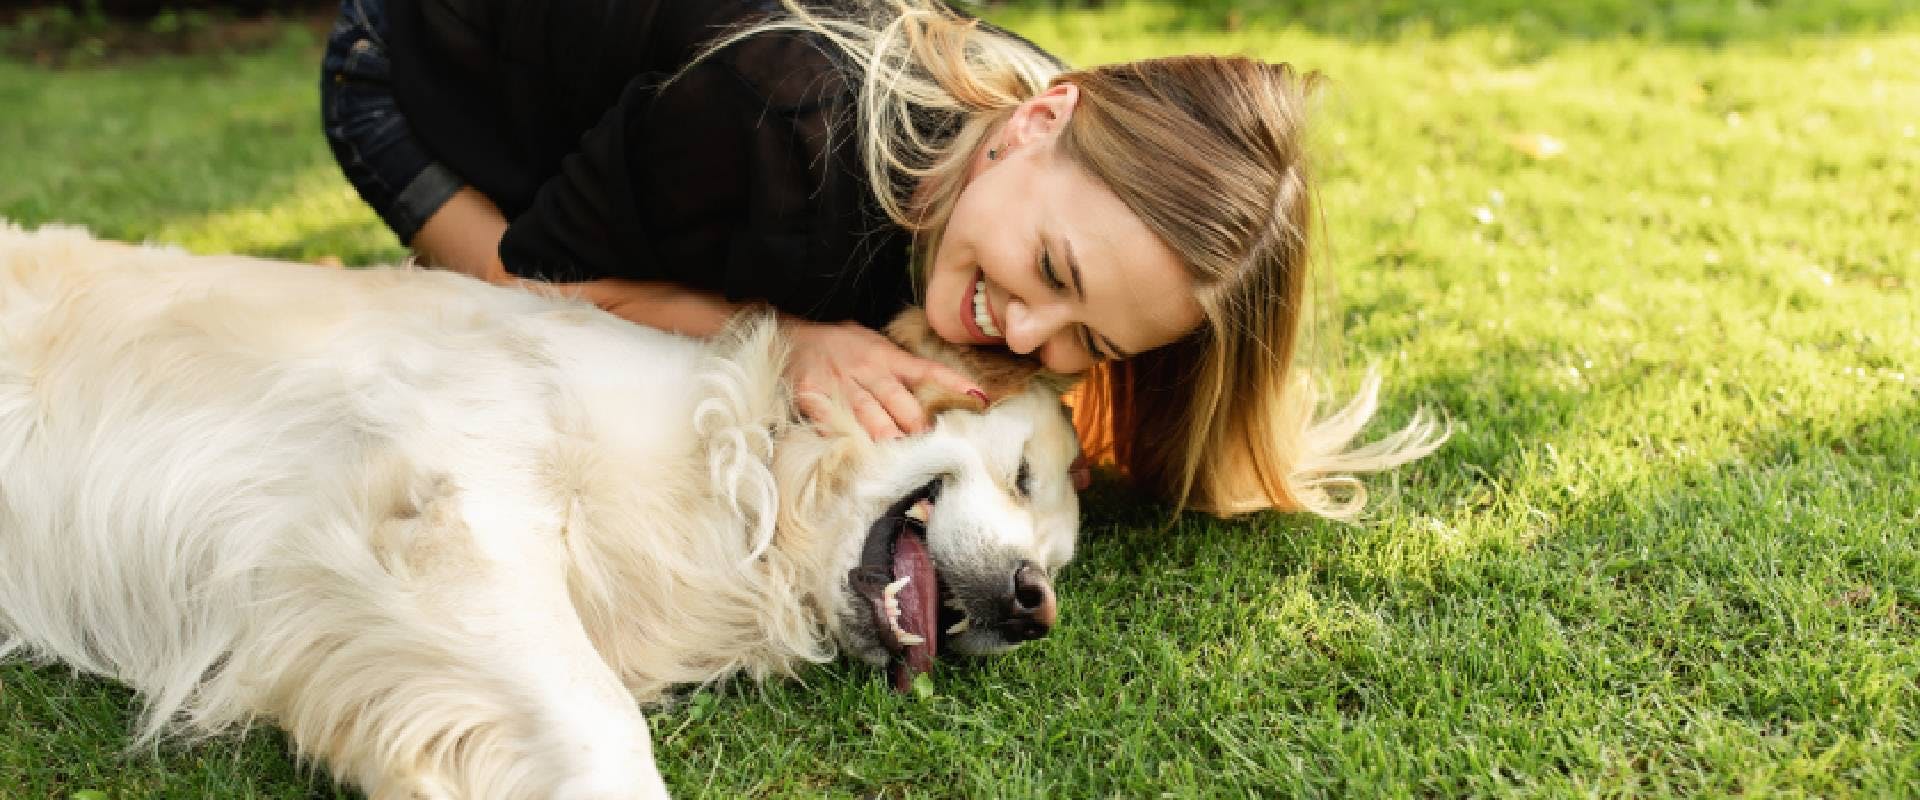 Person playing with Golden Retriever on grass